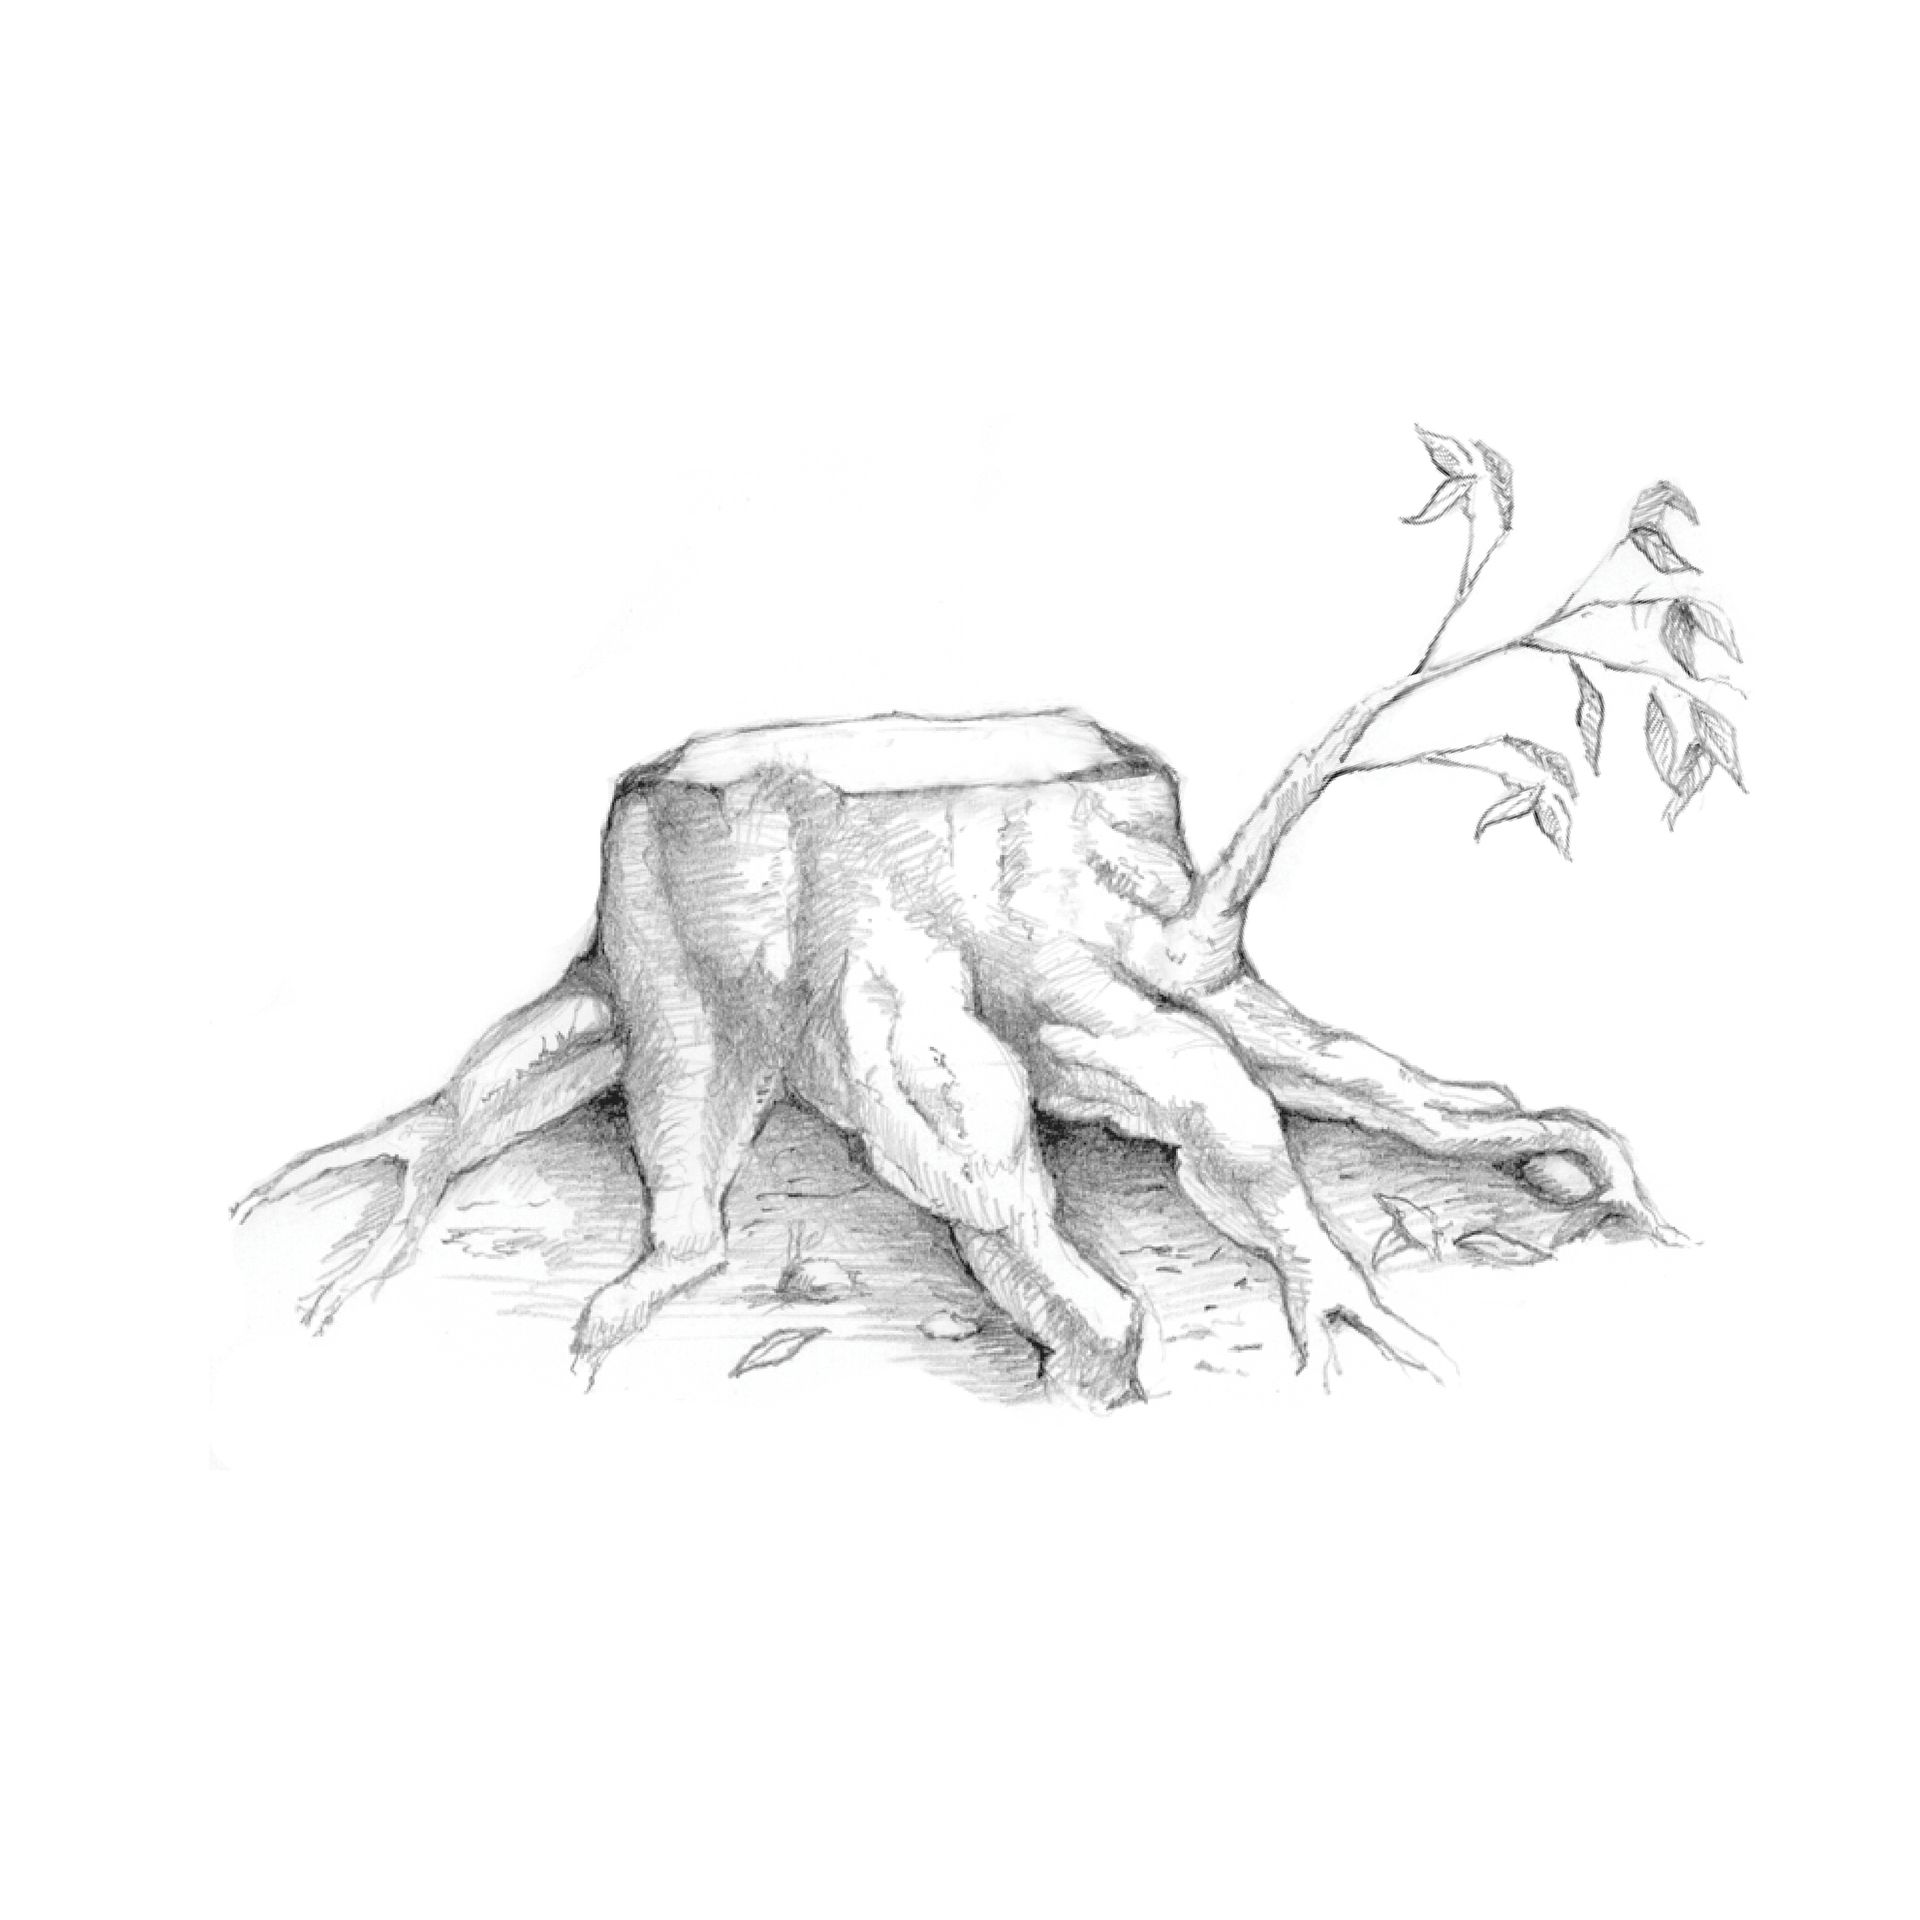 An illustration of a tree stump with a small branch growing near the base, representative of the stem of Jesse.